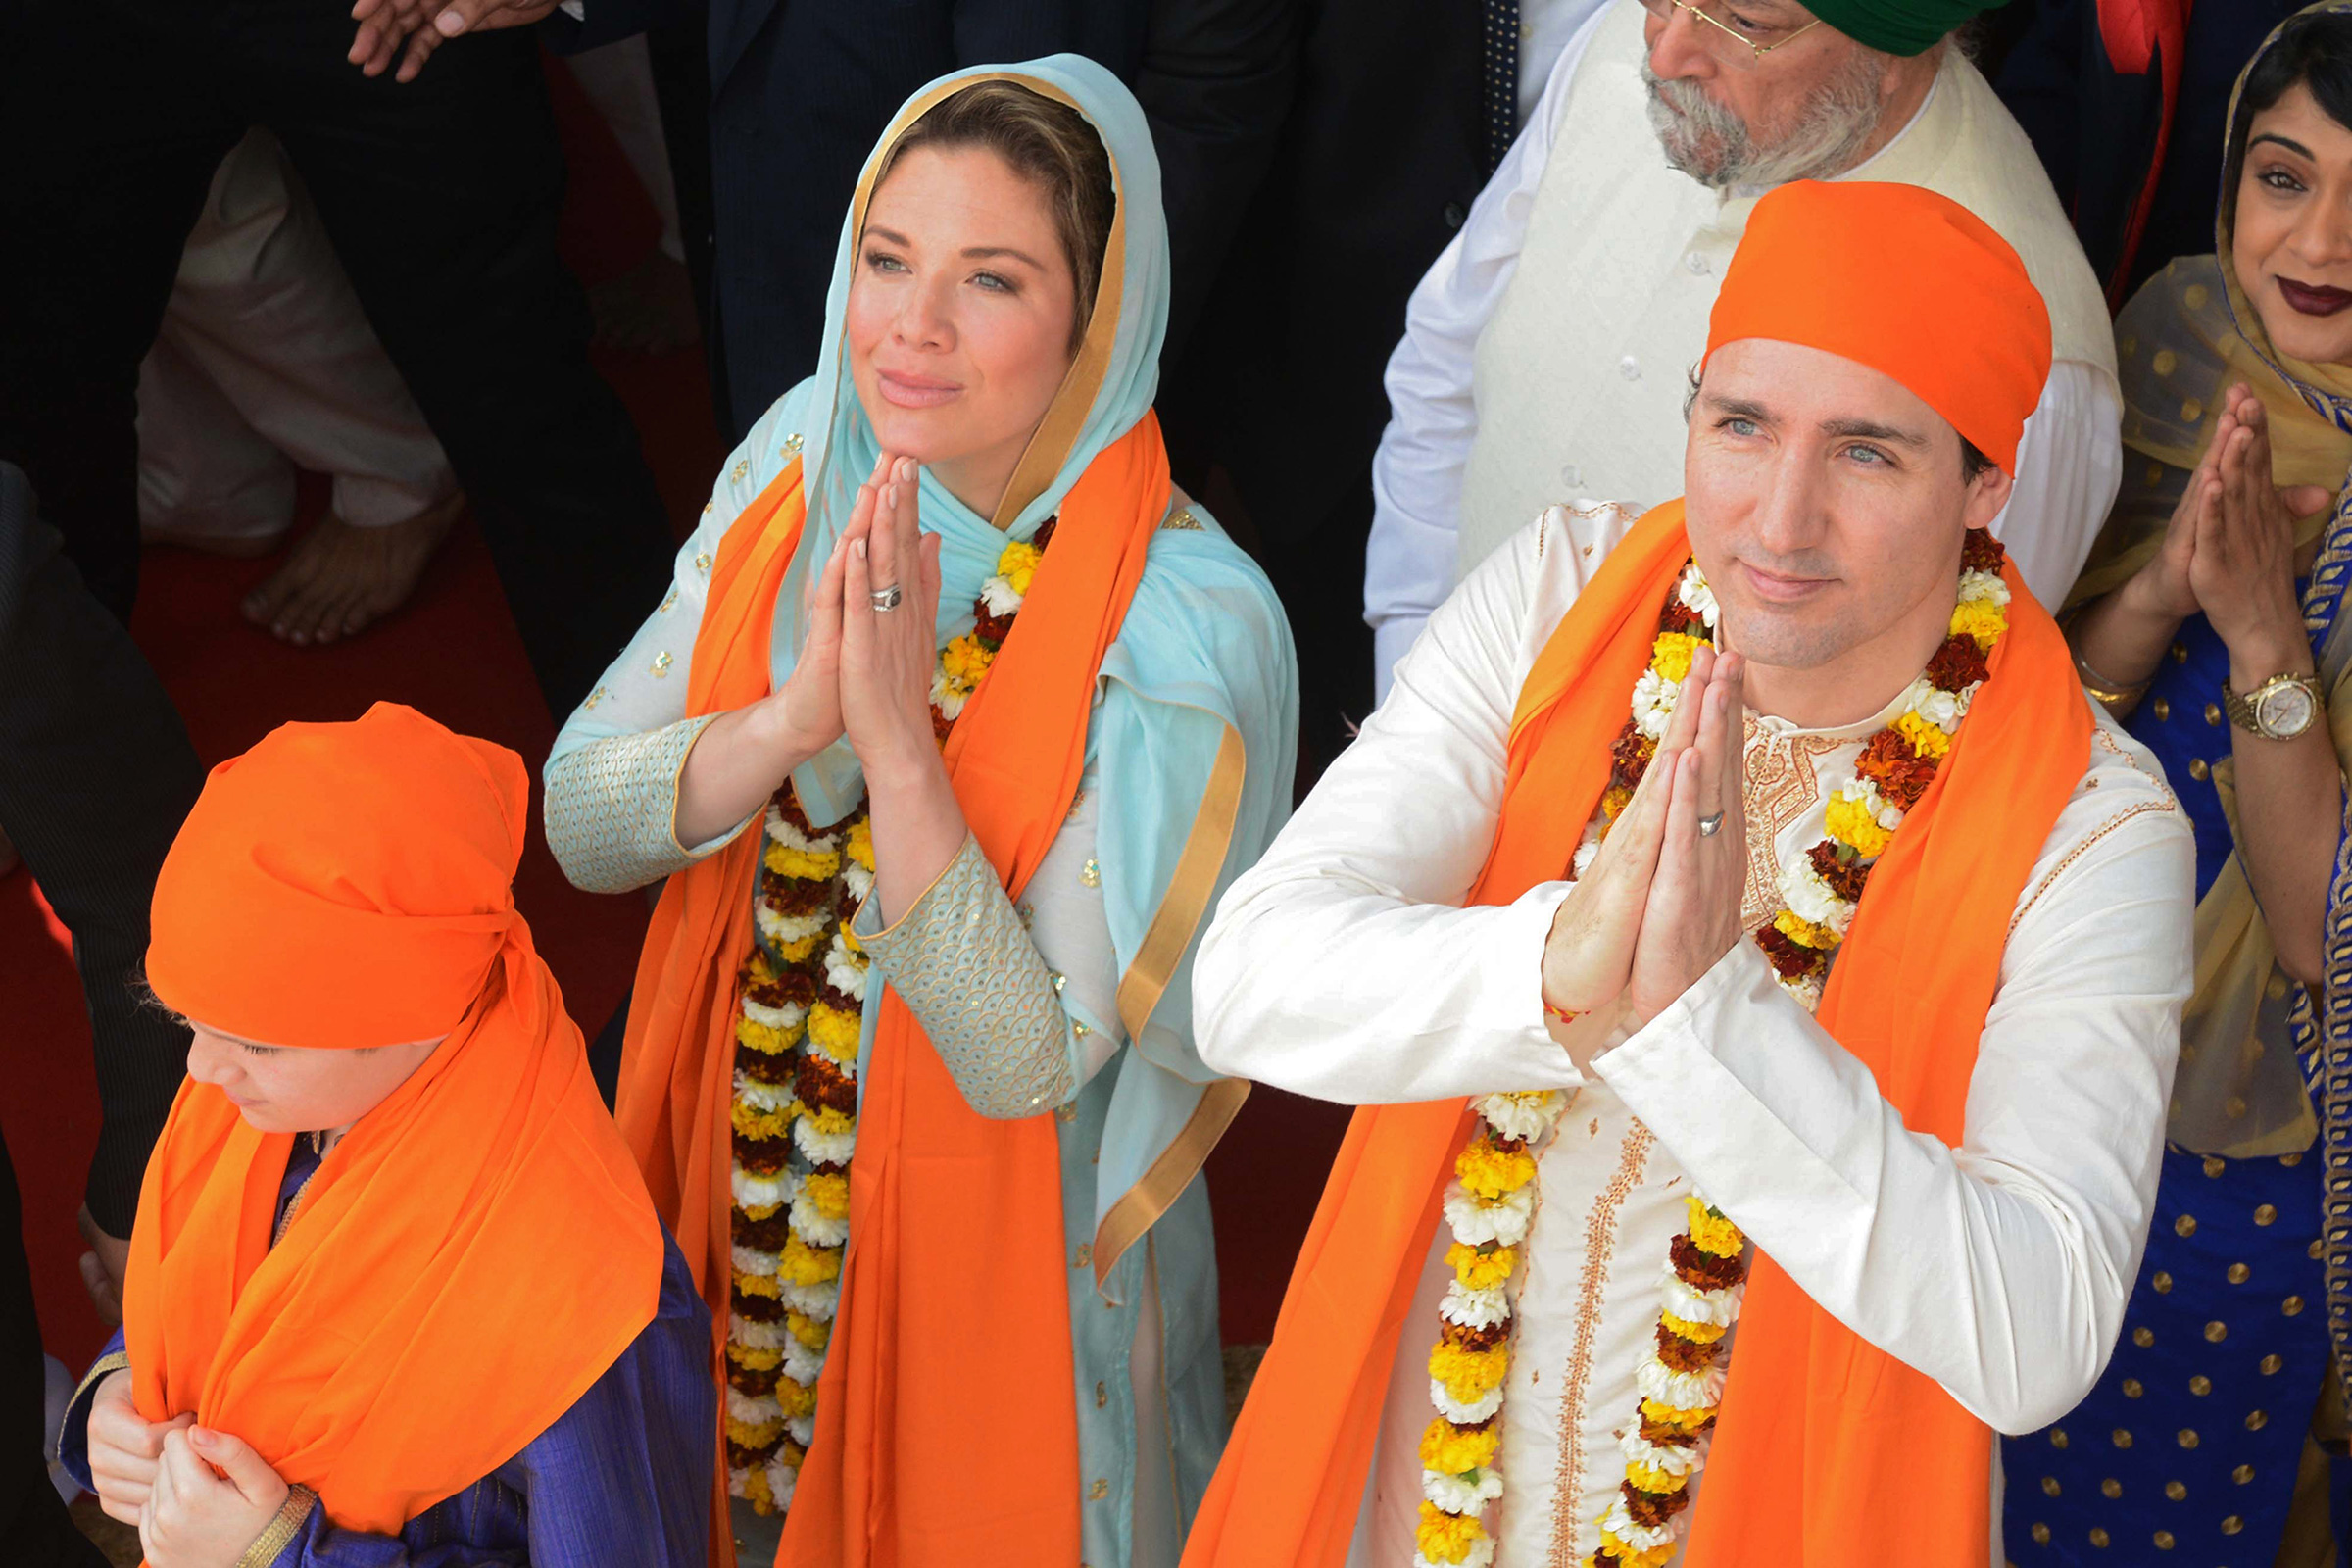 Canadian Prime Minister Justin Trudeau and wife Sophie Gregoire pay their respects at the SSikh Golden Temple in Amritsar on Feb. 21, 2018. (Narinder Nanu—AFP/Getty Images)